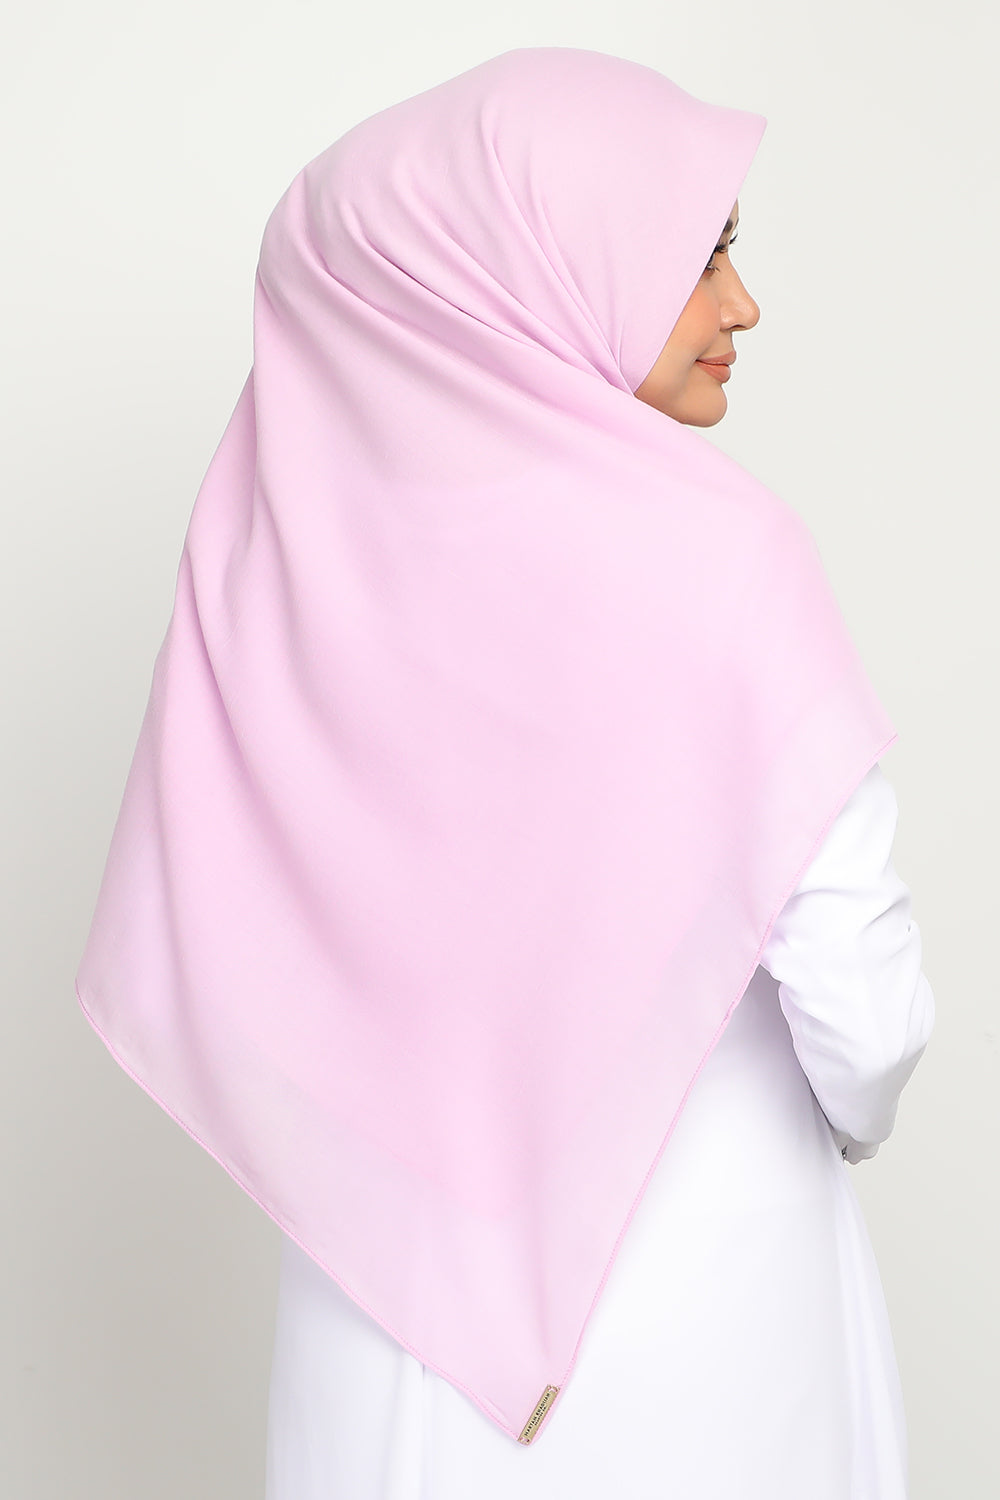 Classic Bawal Cherry Pink